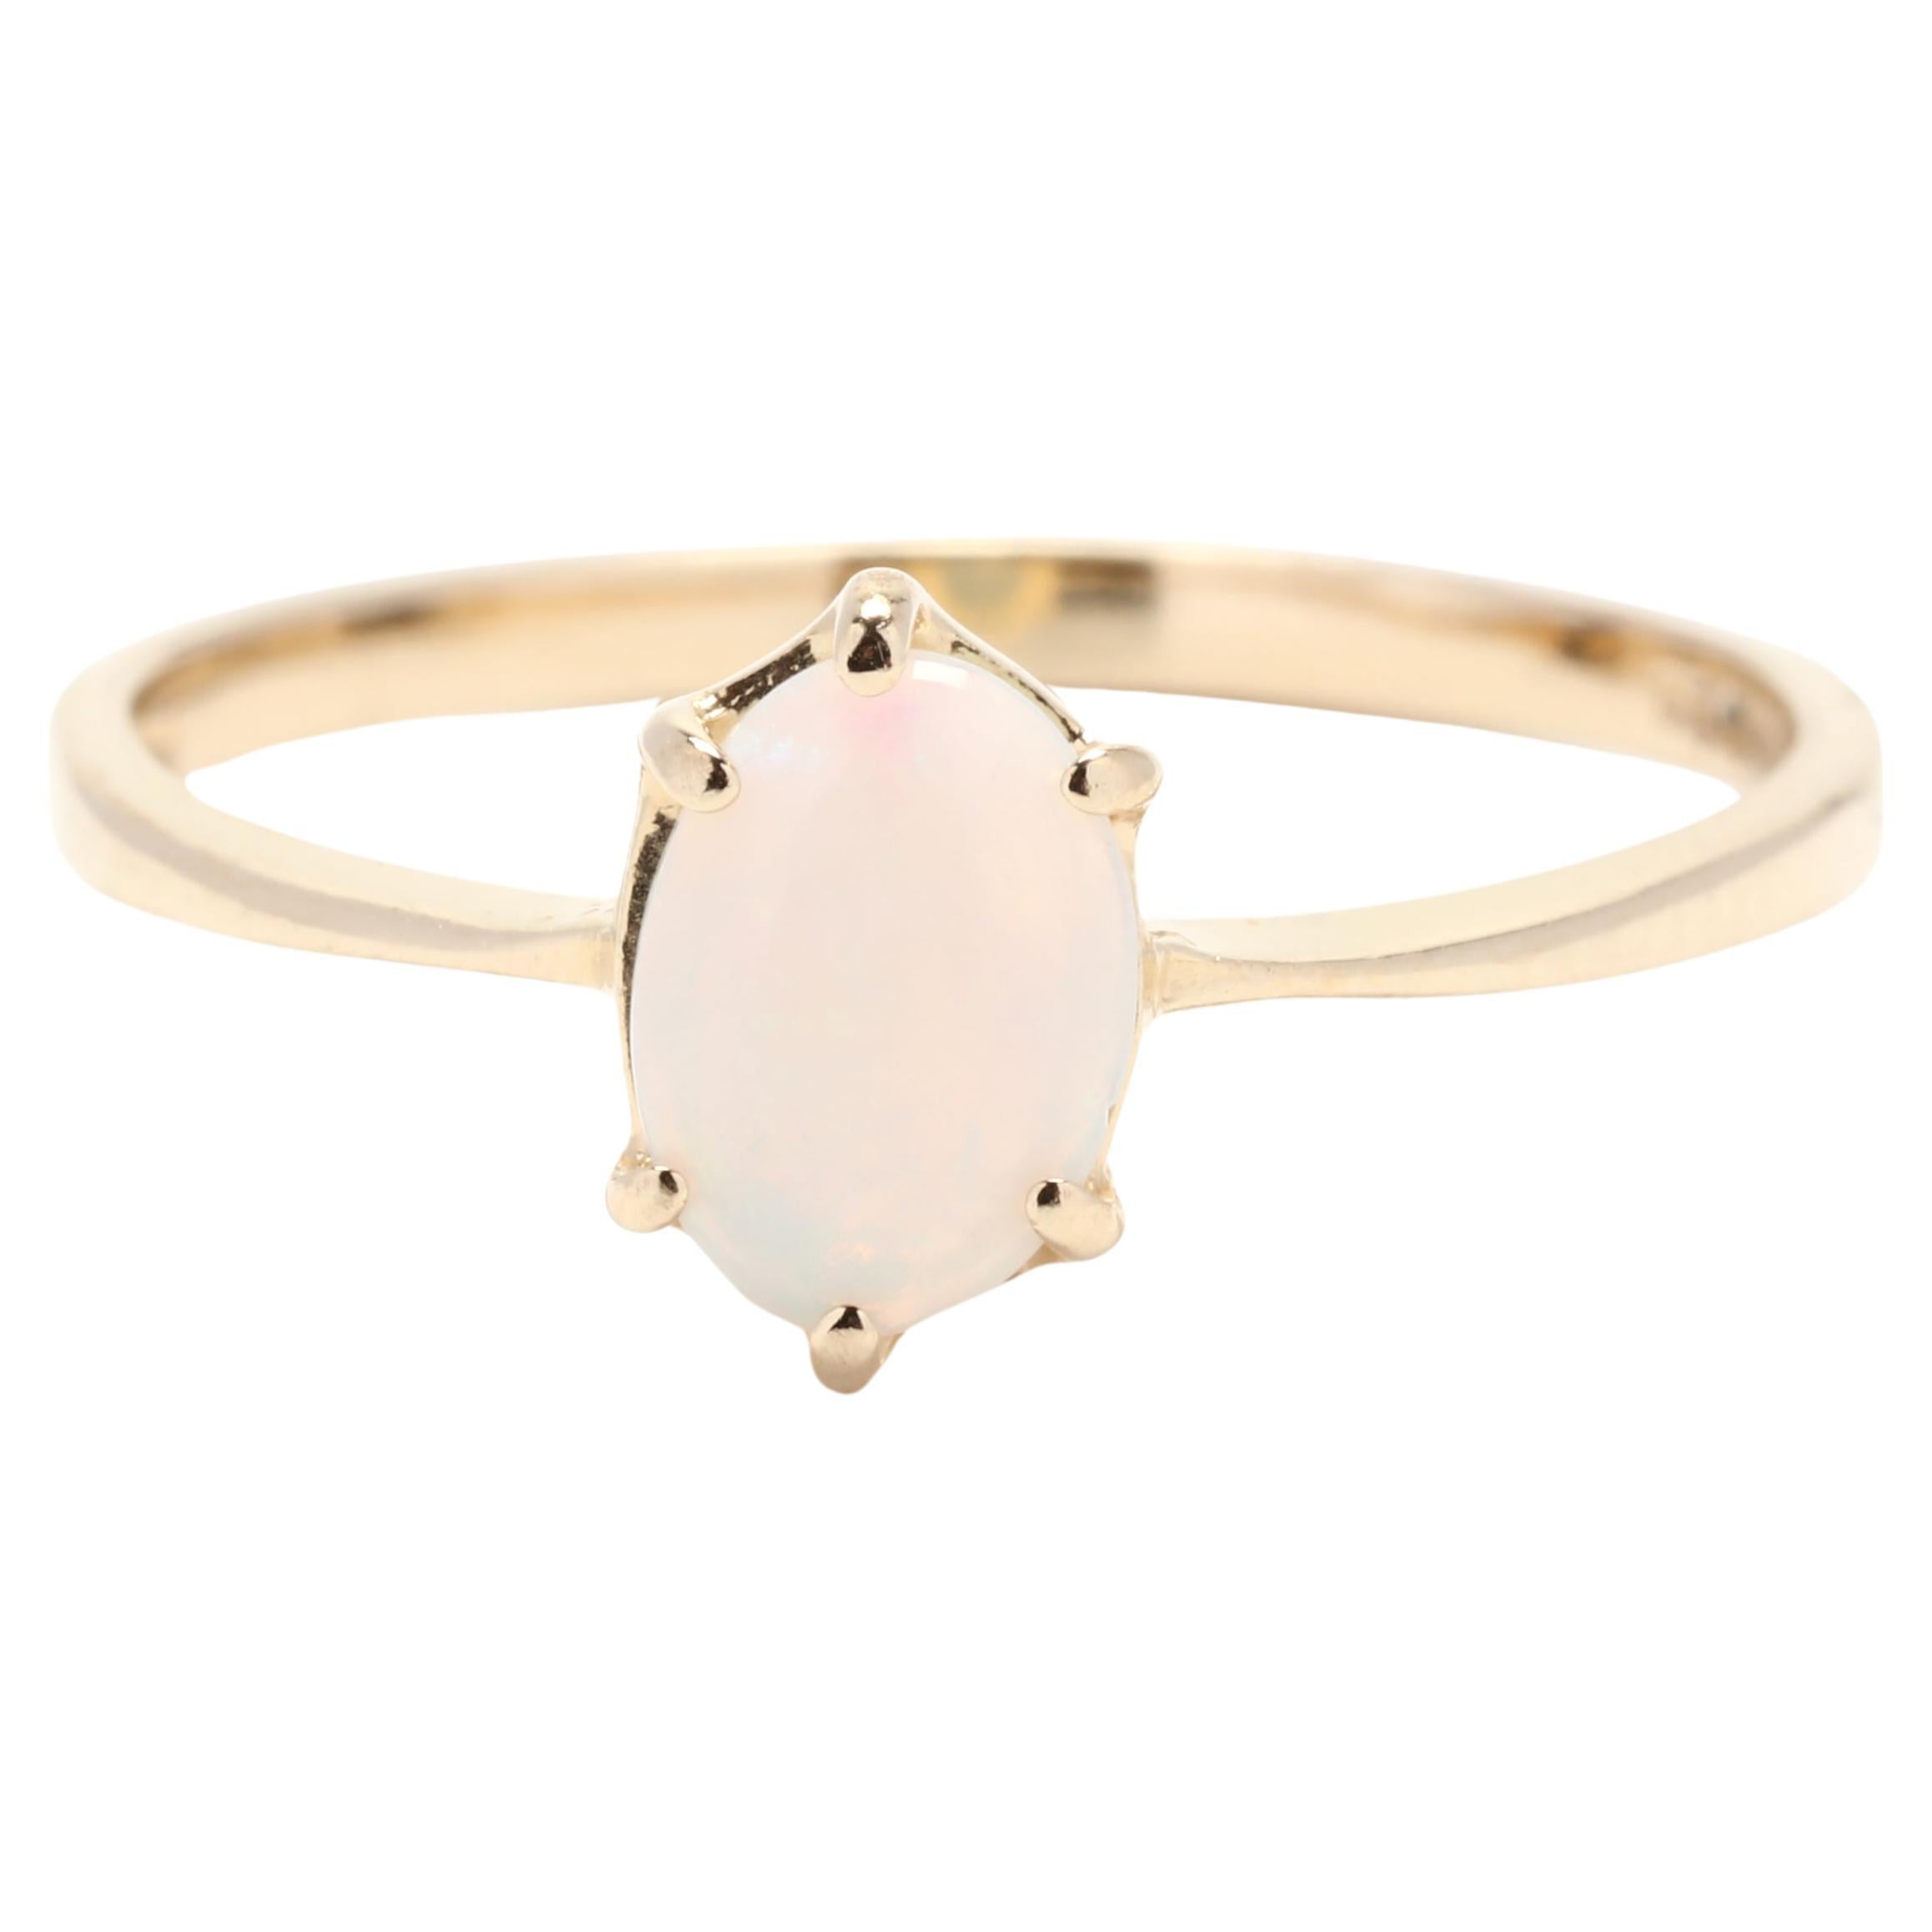 Solitaire Oval Opal Ring, 14k Yellow Gold, Ring Size 6.25, October Birthstone For Sale